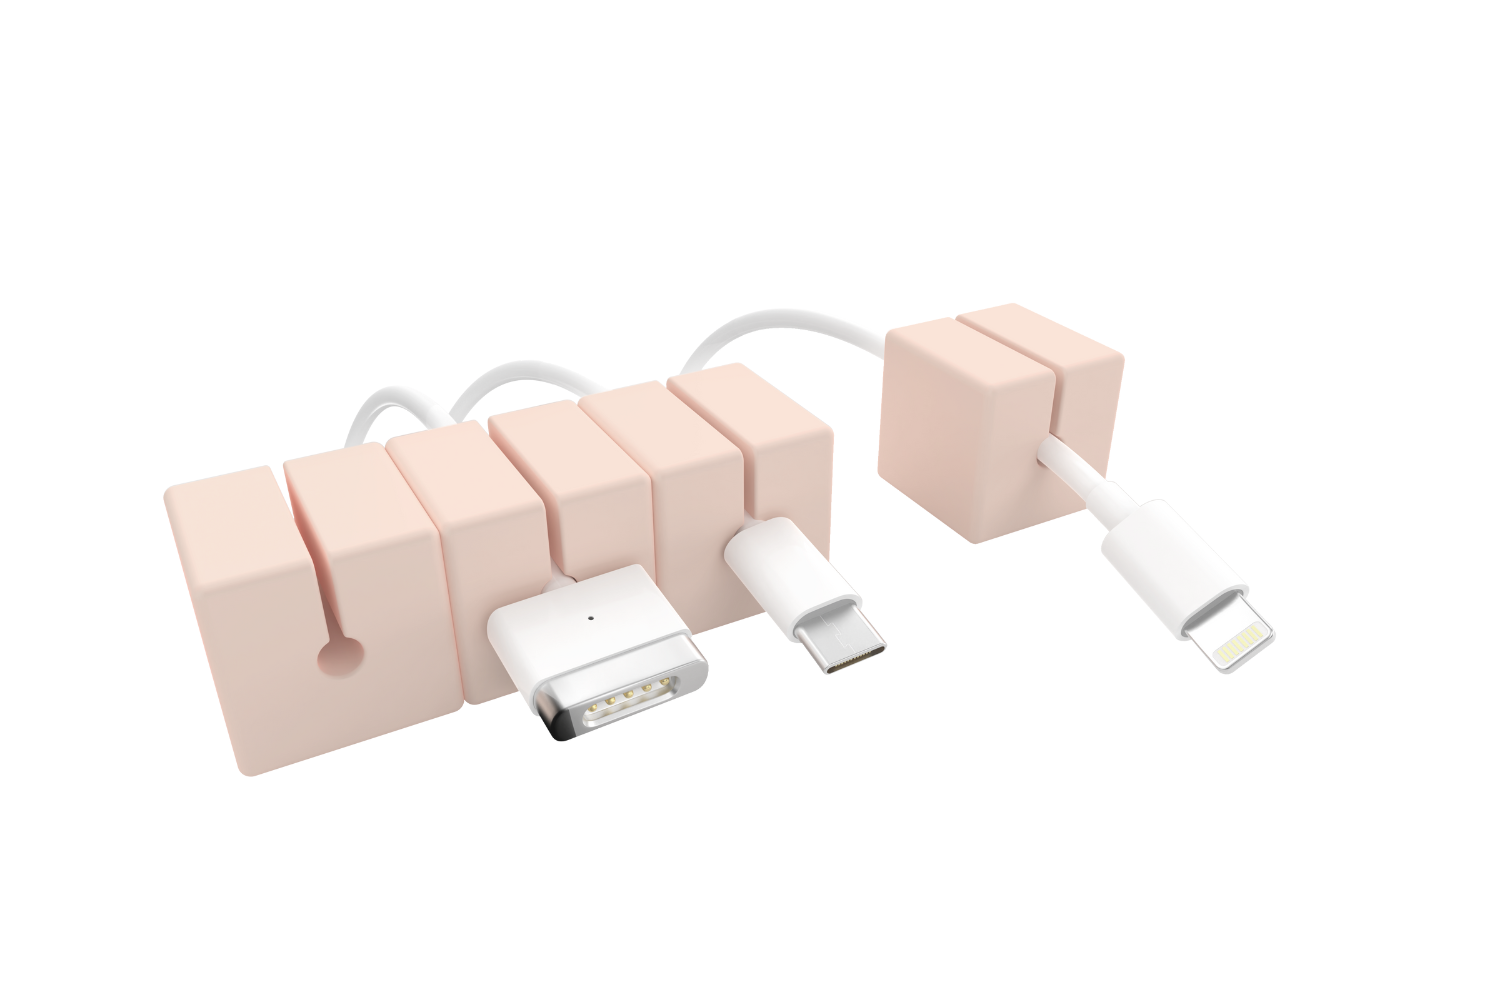 CABLE BLOCKS - PINK (4 PACK) by Function101